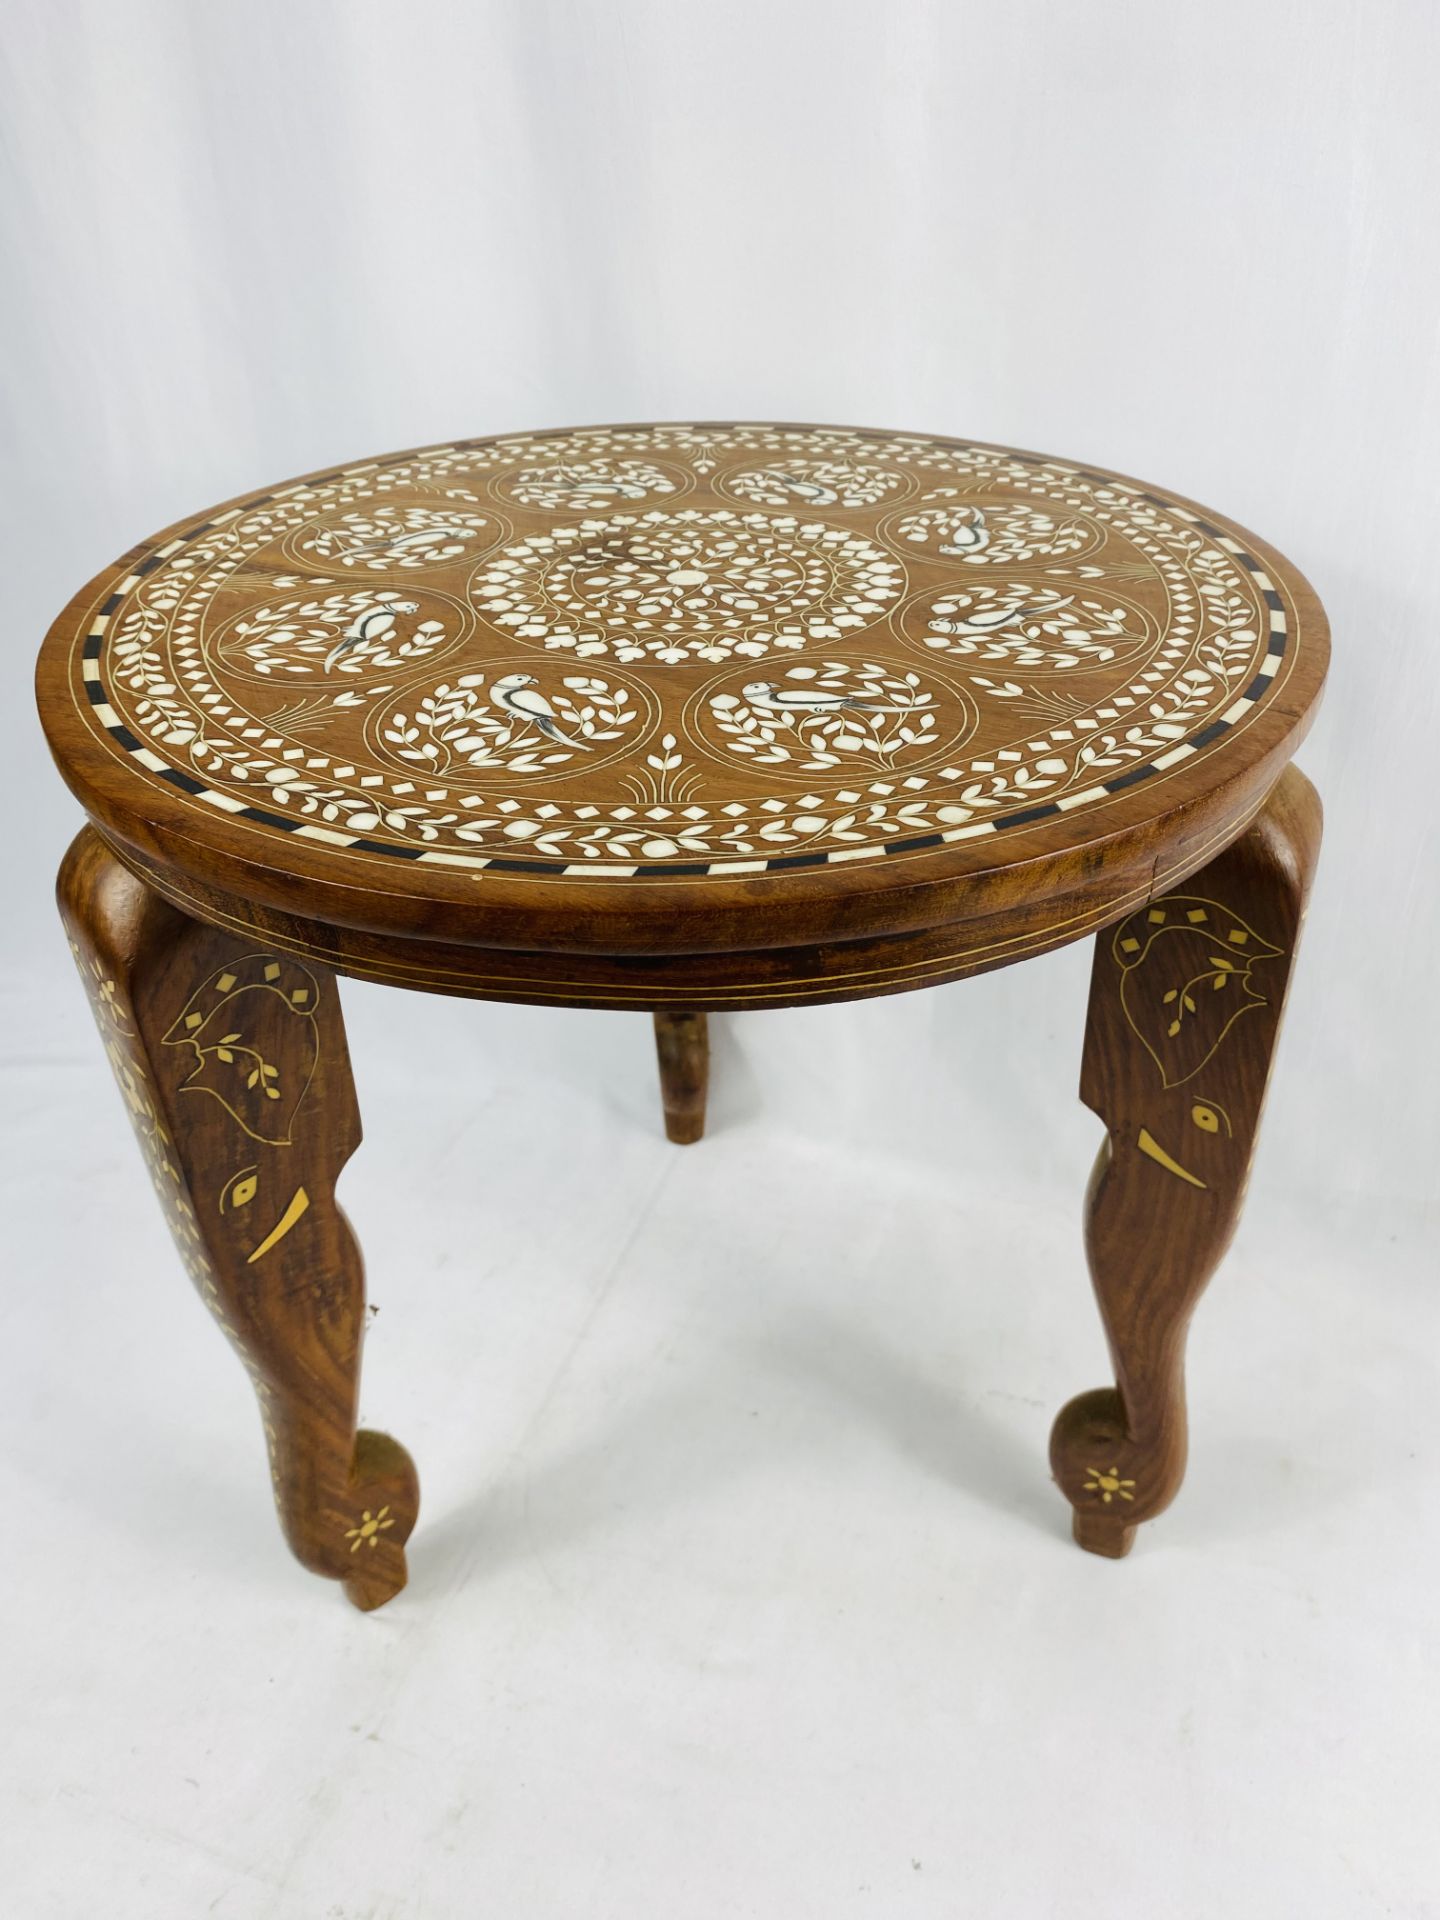 Indian occasional table with bone inlay - Image 2 of 4